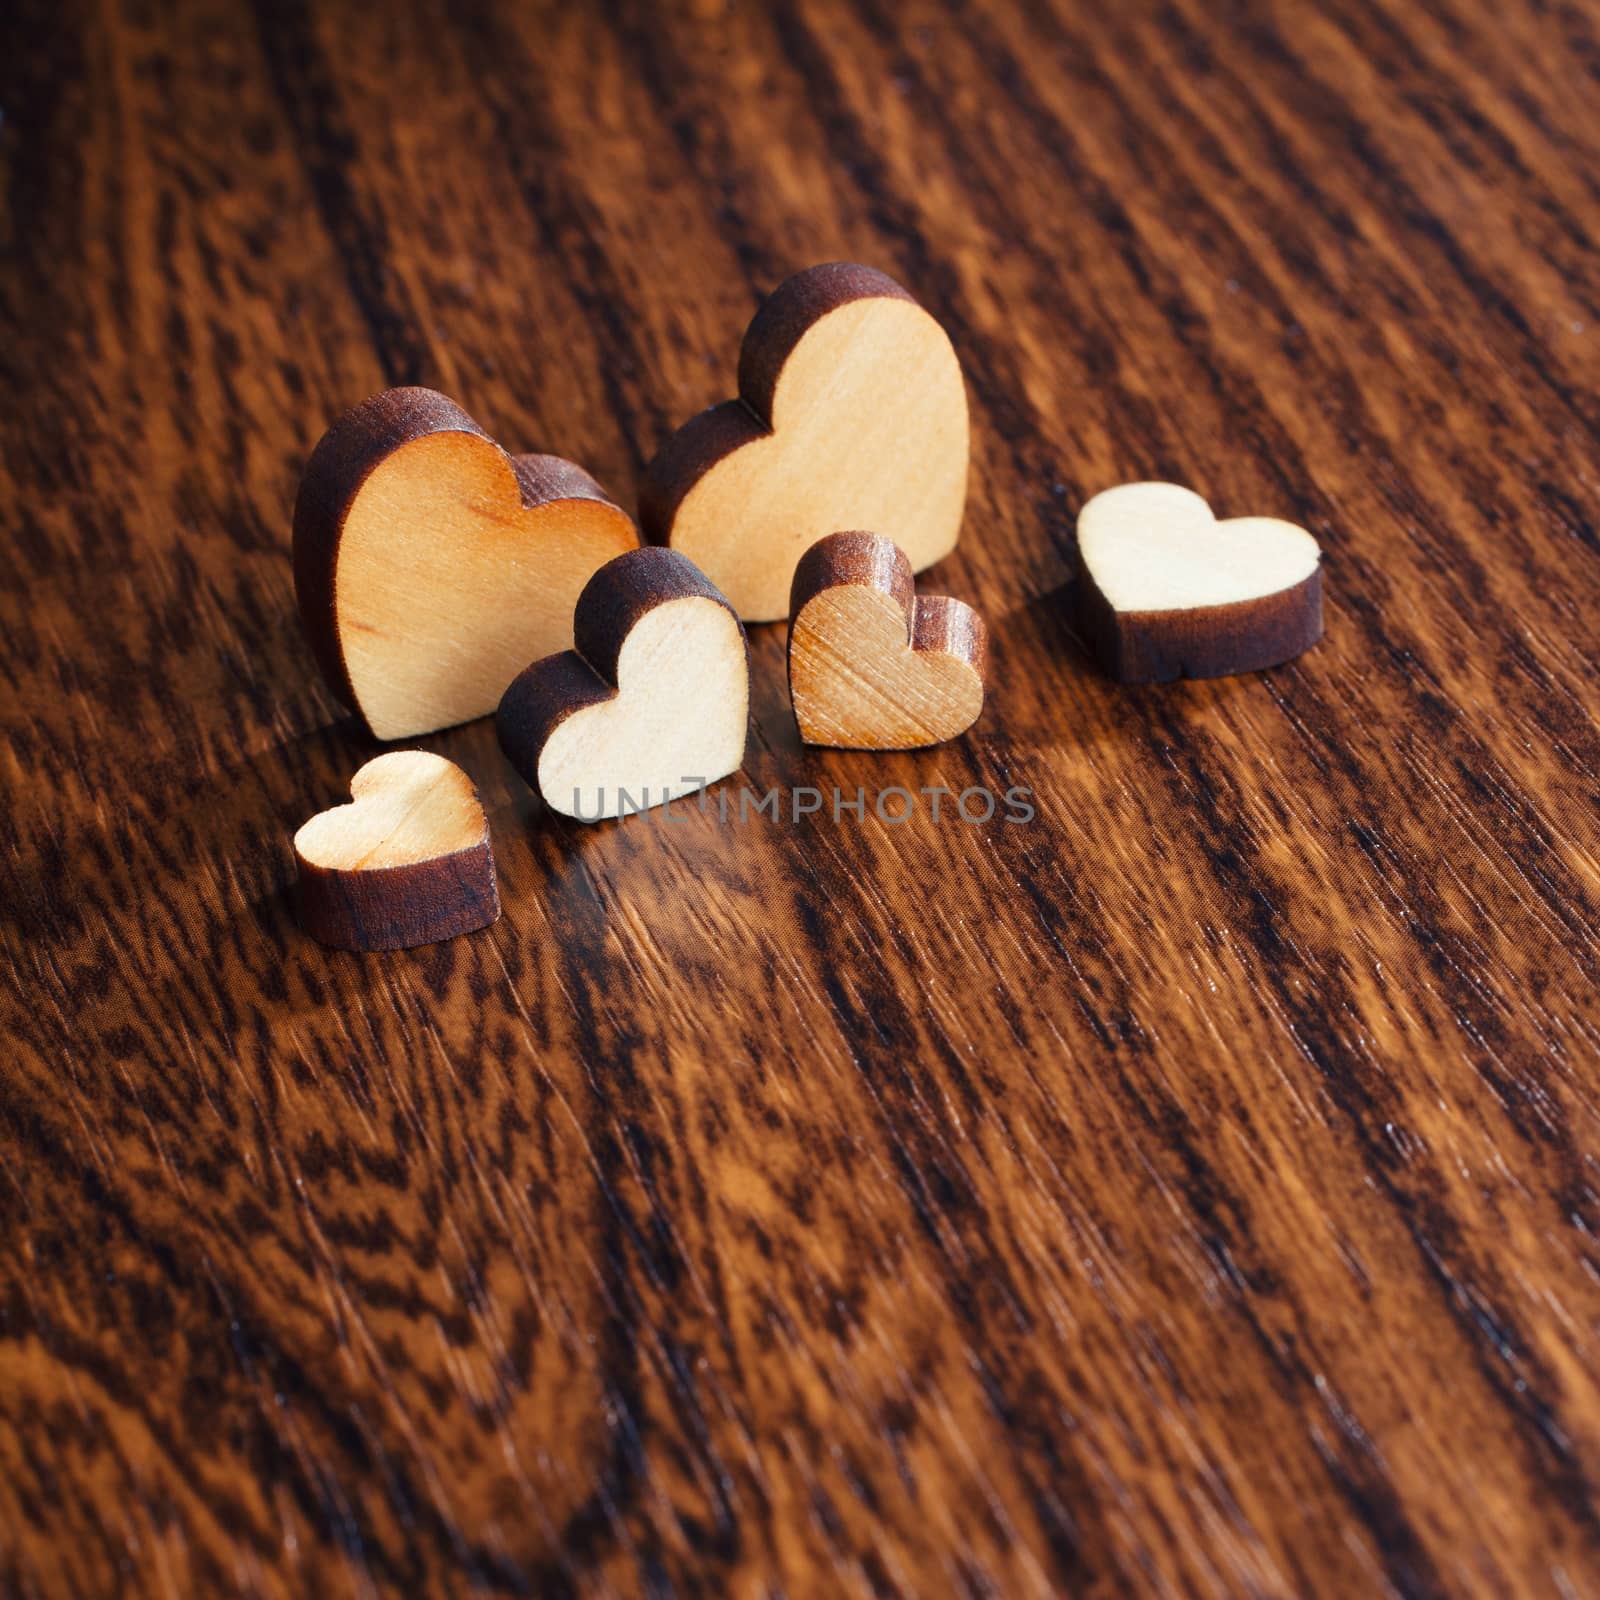 Hearts on a wooden surface